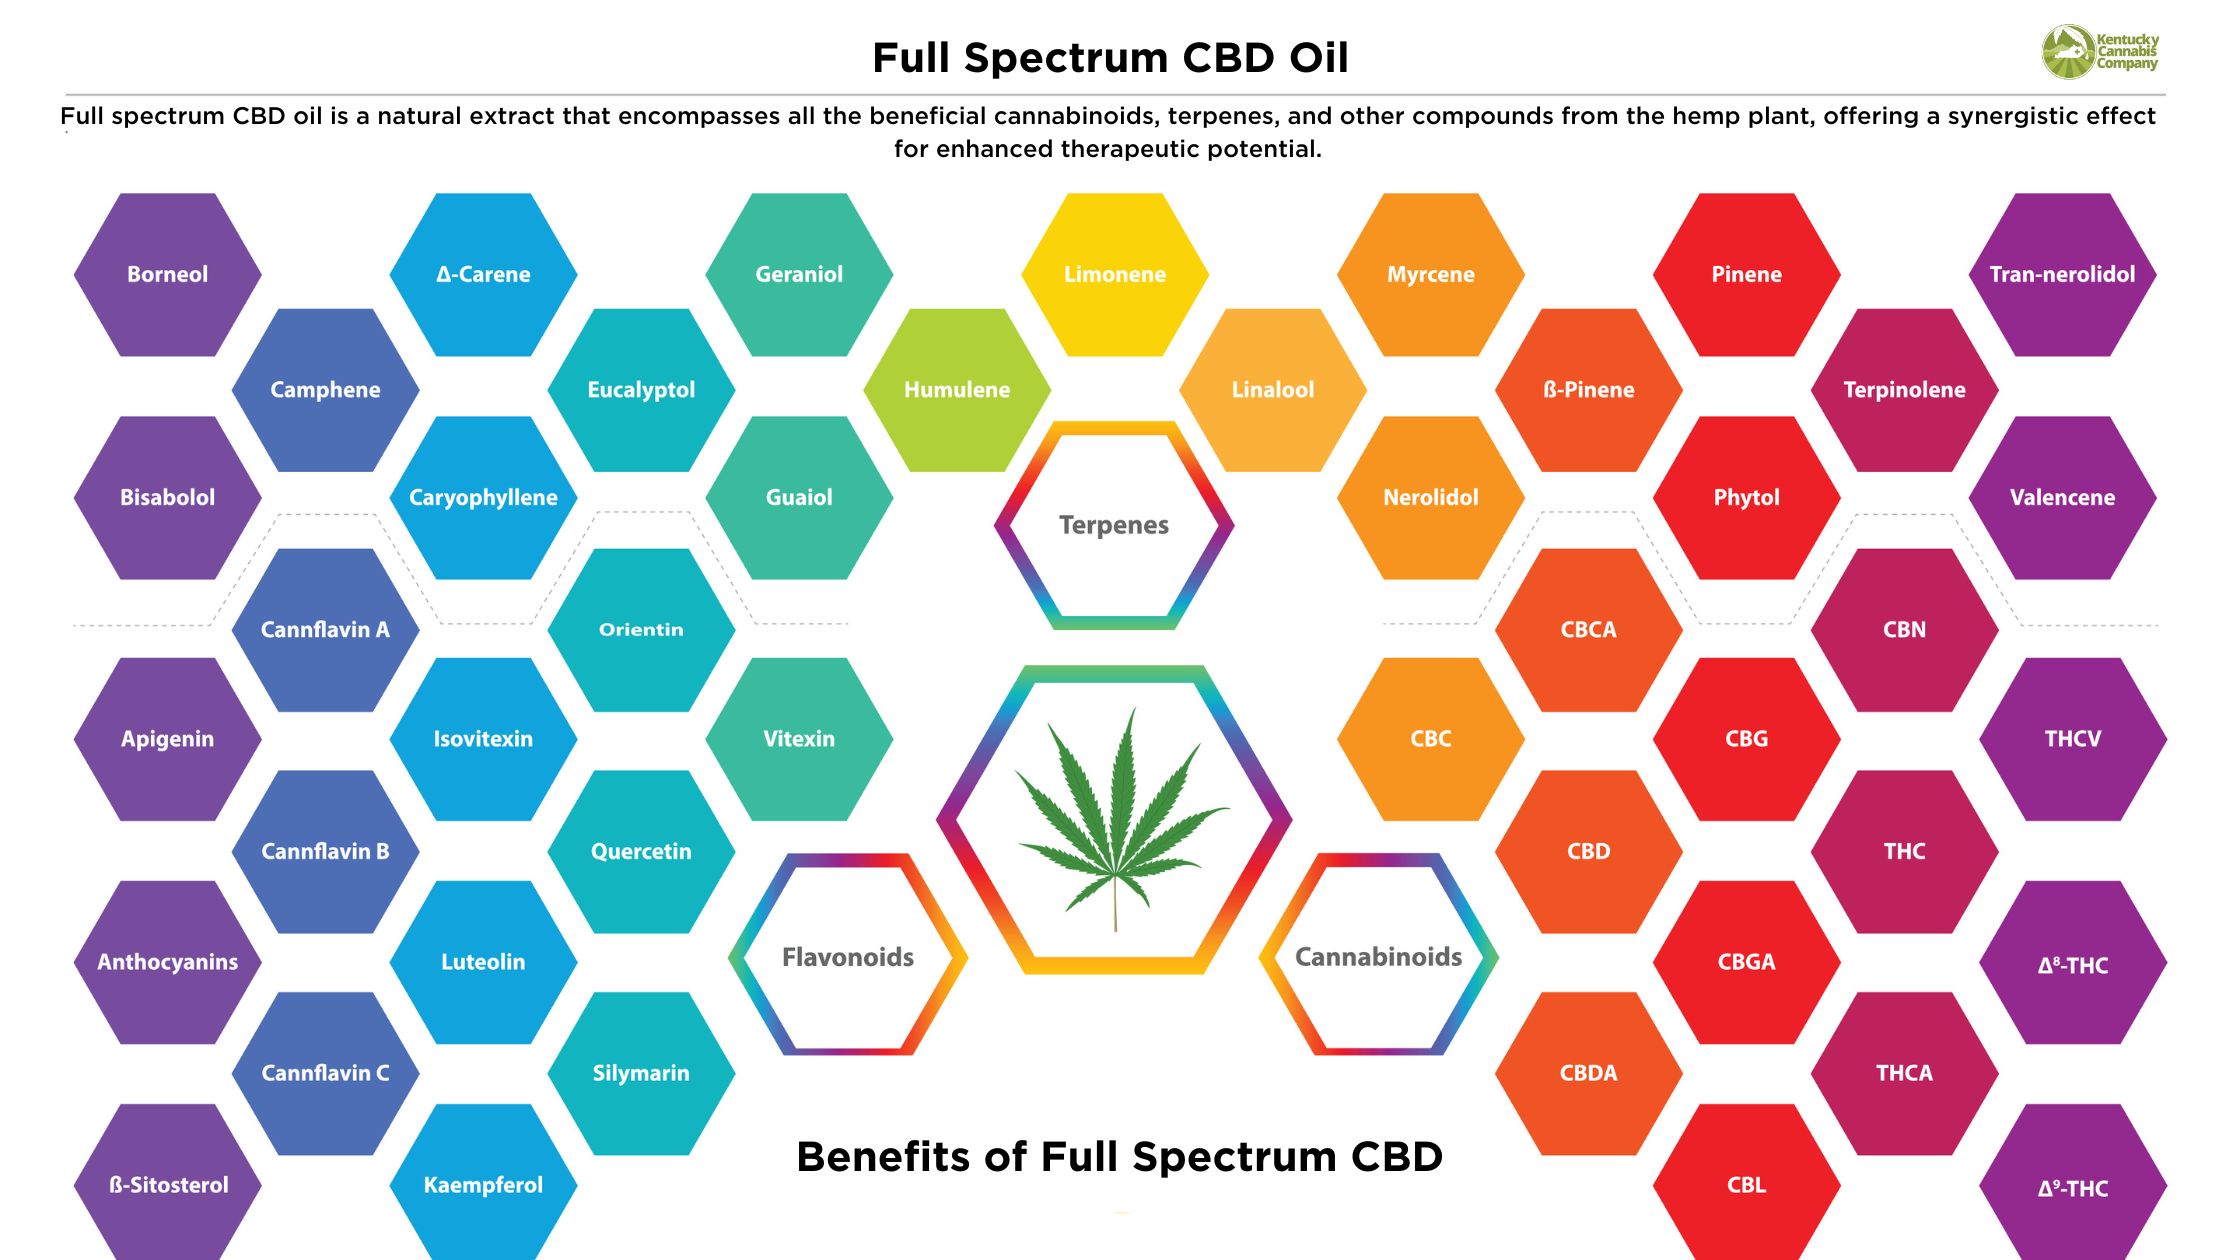 create a Alt Text, A title, Caption and description for a image showing the names of differant cannabinoids, terpinoids and flavornoids that make up Full Spectrum CBD Oil